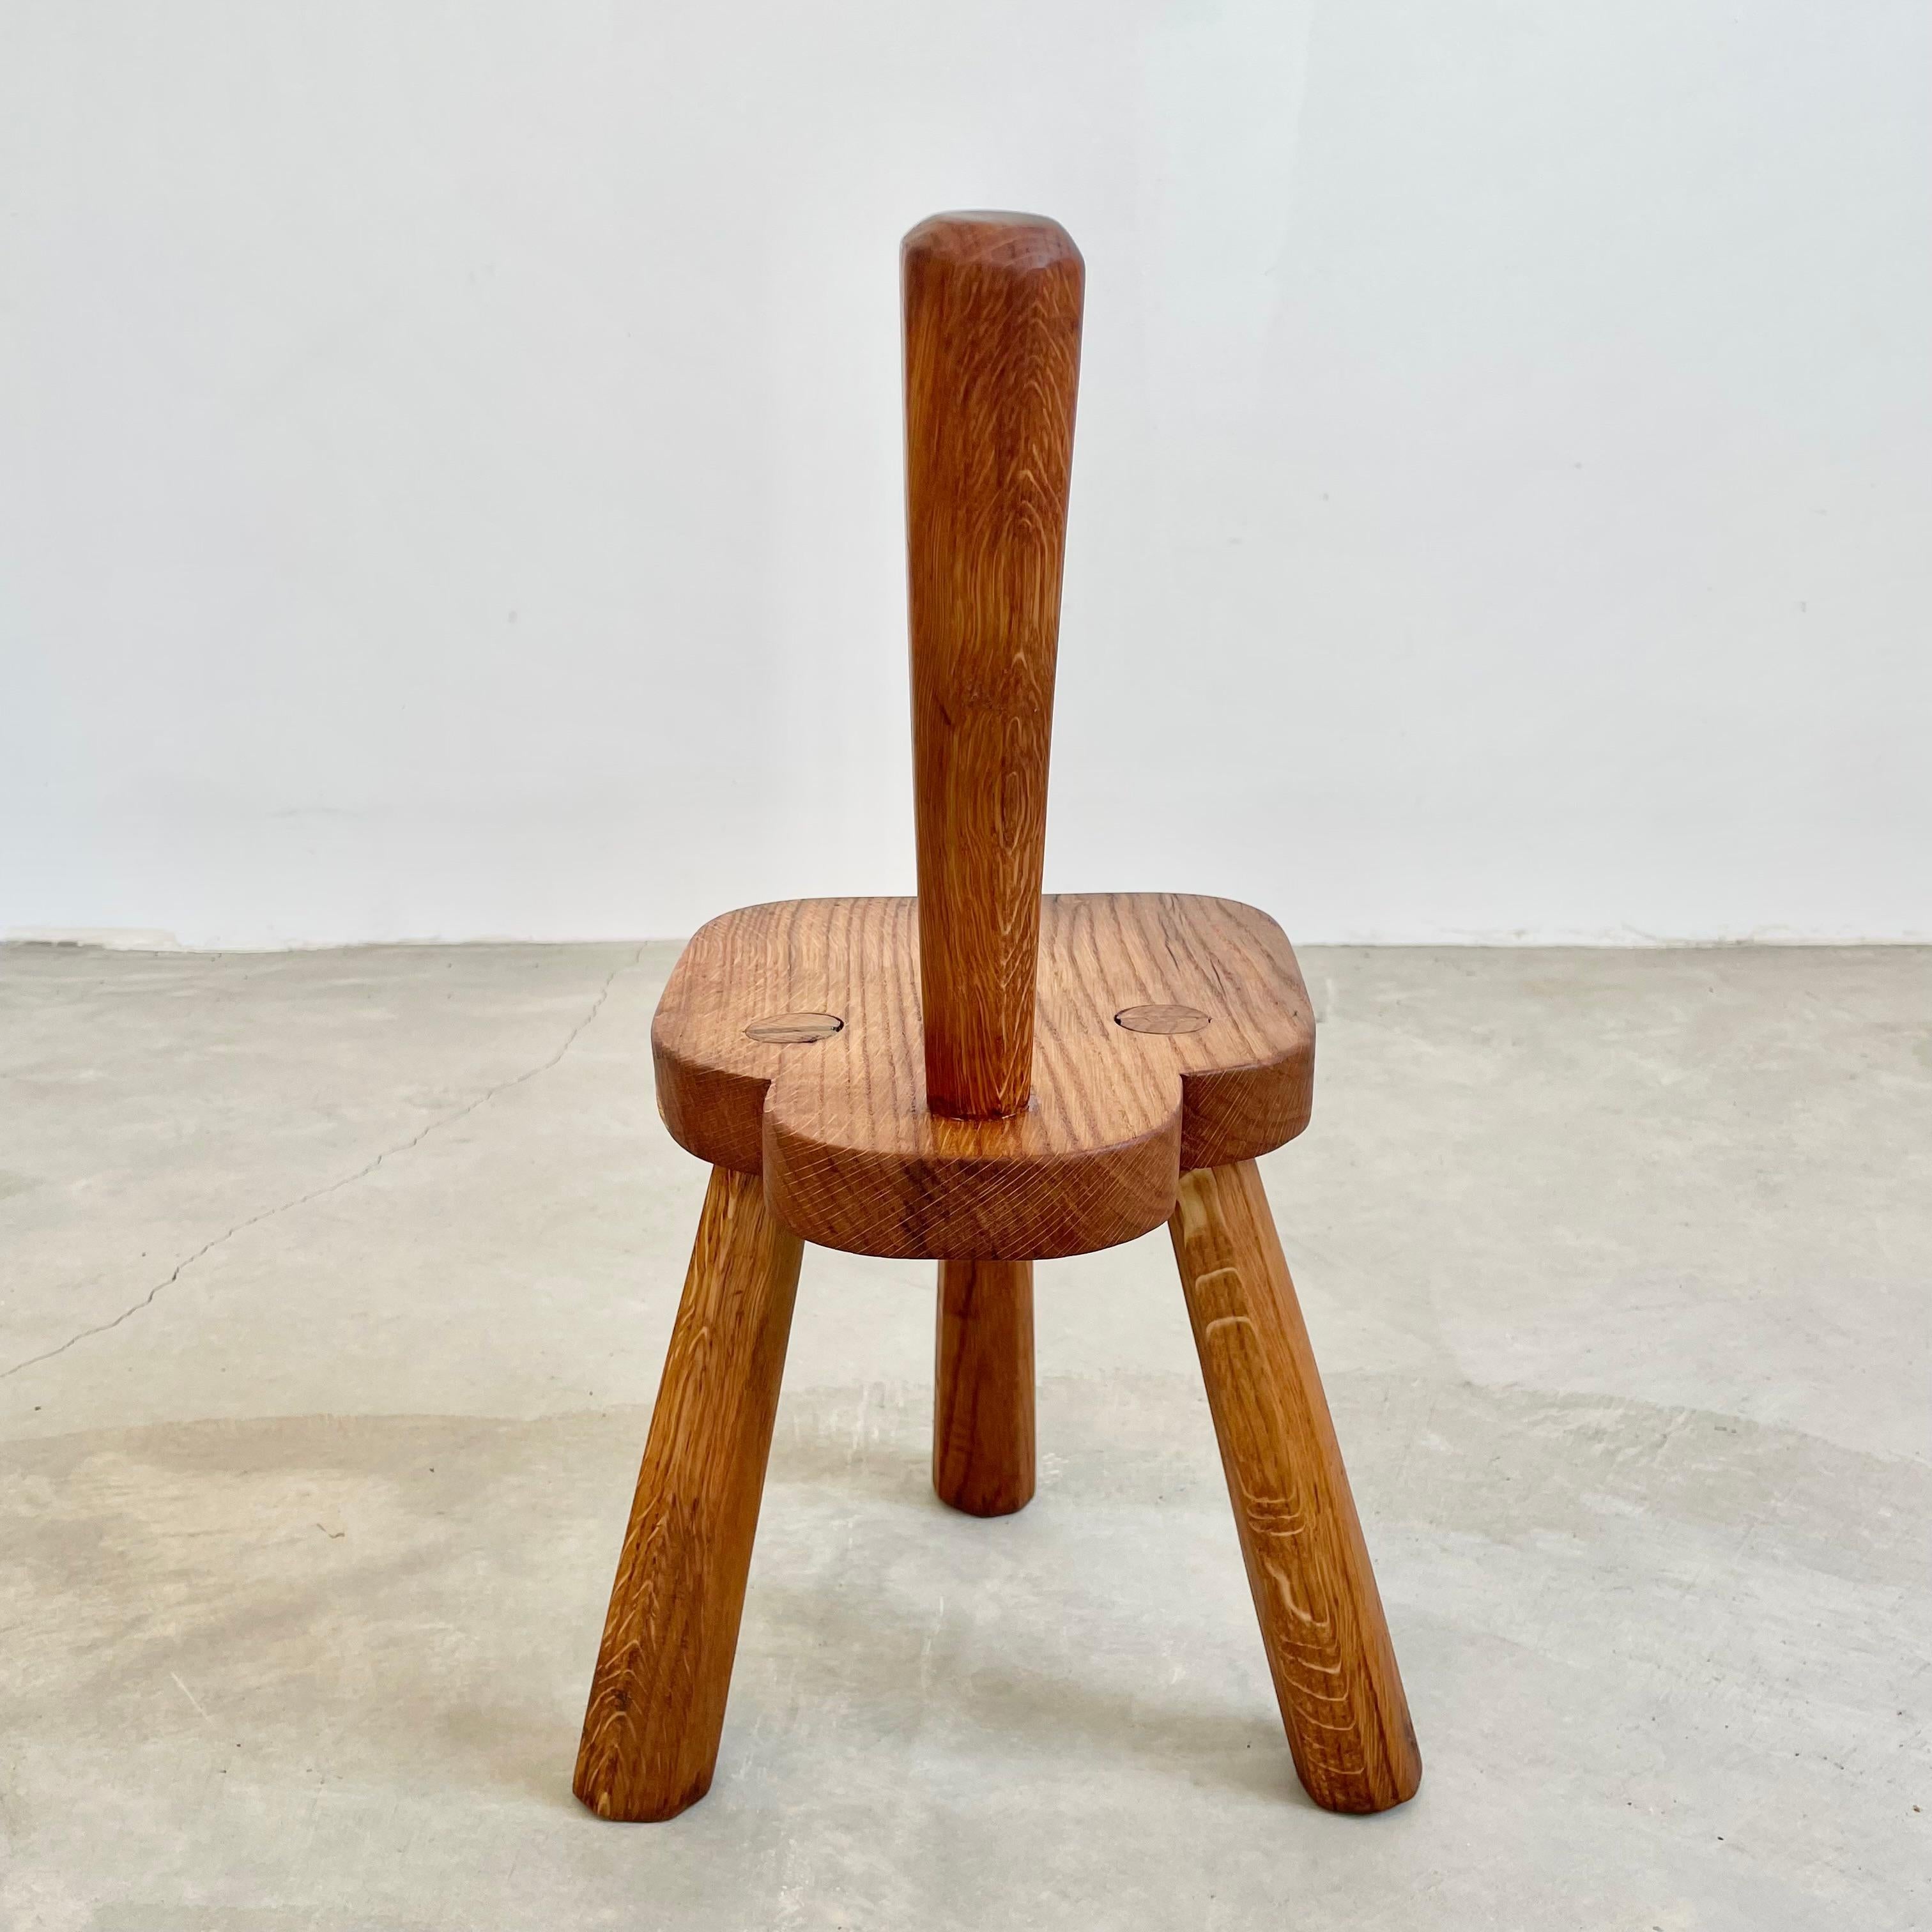 wooden stool with backrest